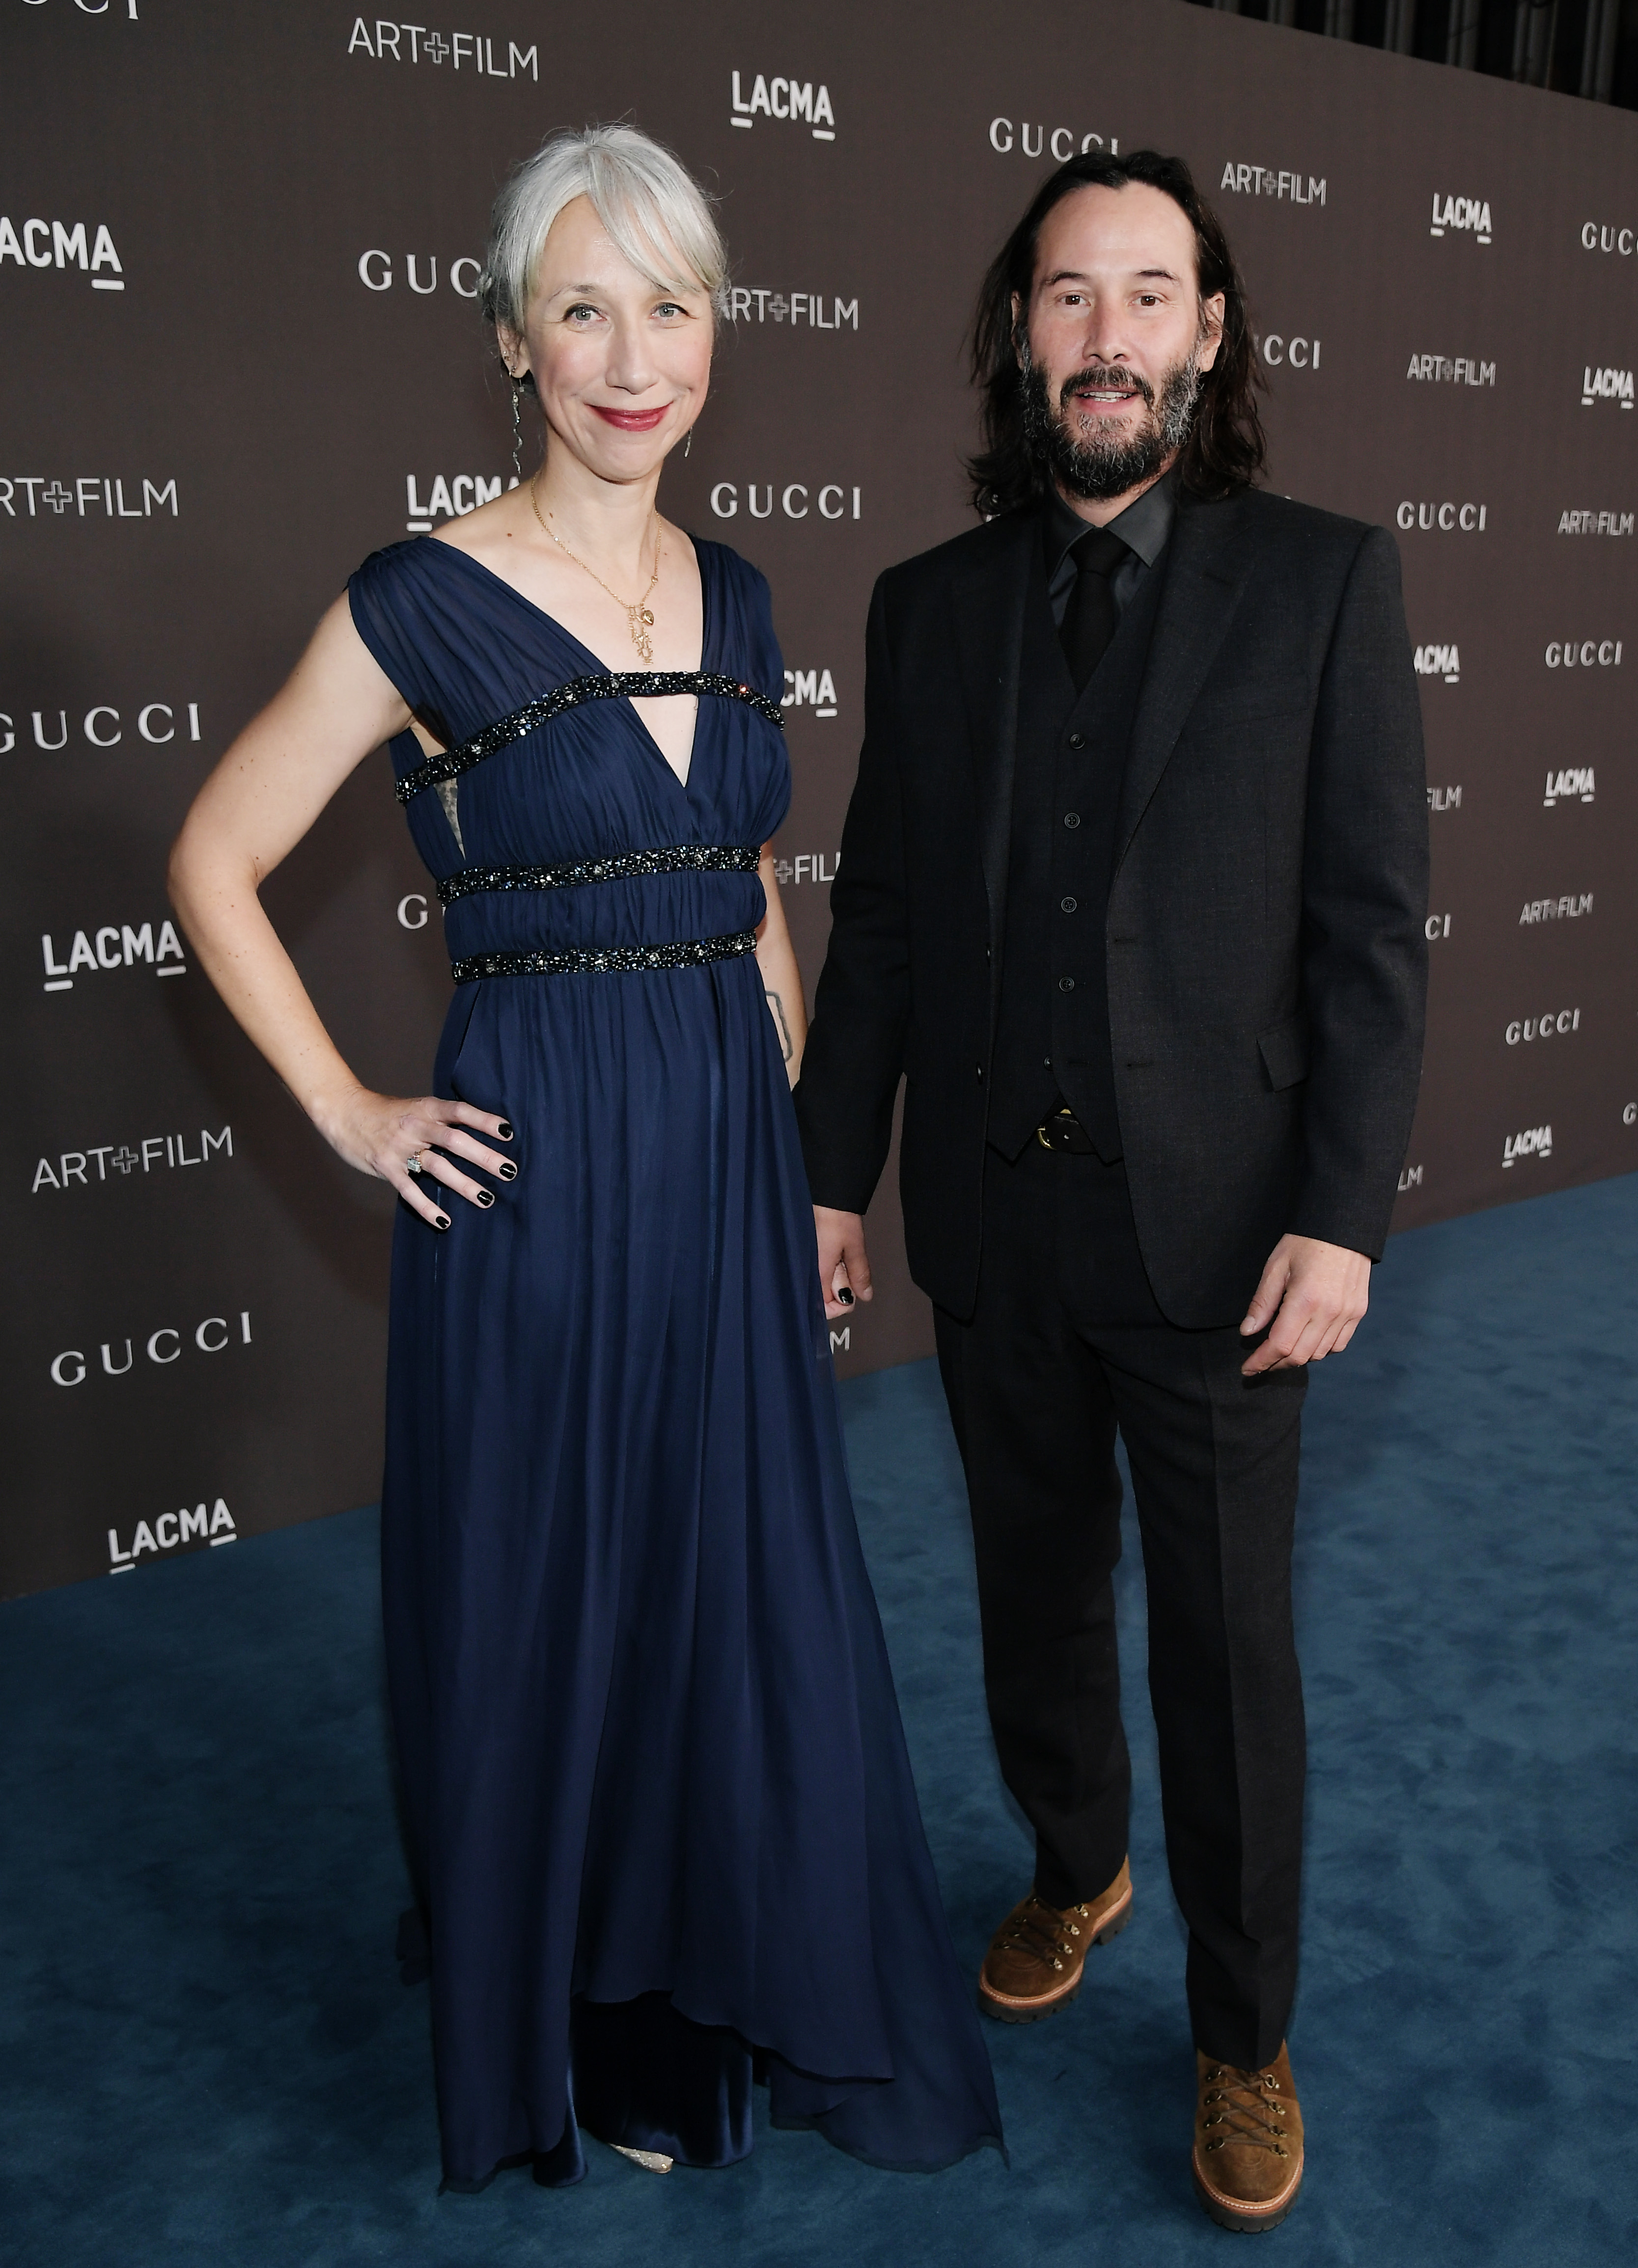 Alexandra Grant and Keanu Reeves in Los Angeles, California on November 2, 2019. | Source: Getty Images